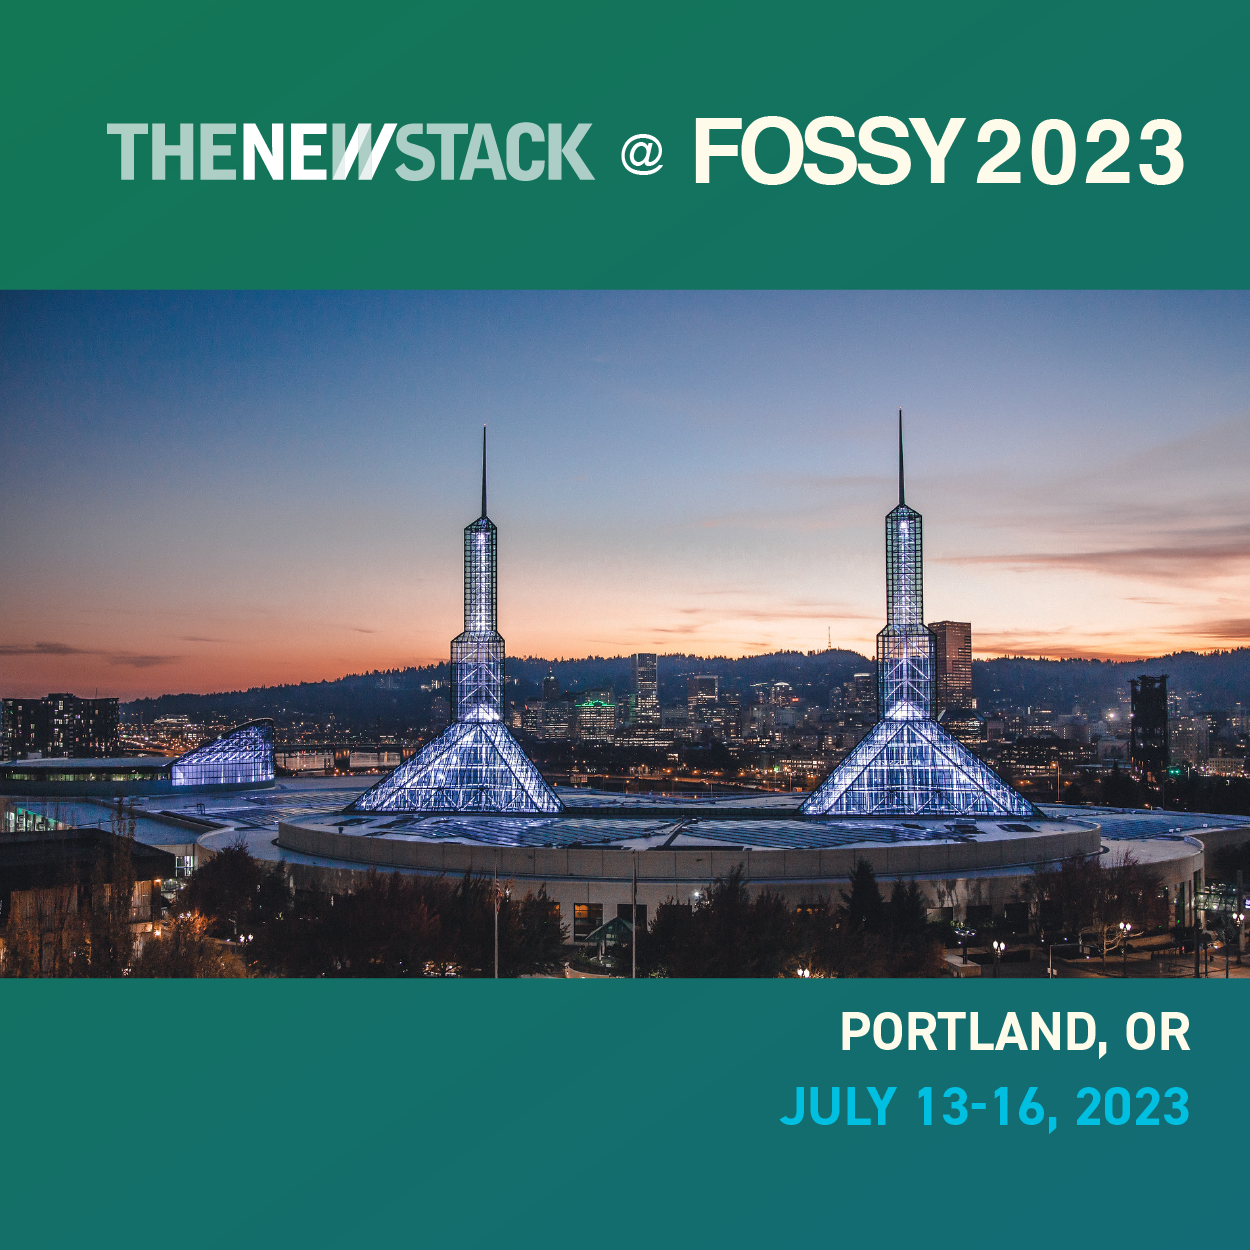 Event Poster Image for FOSSY 2023